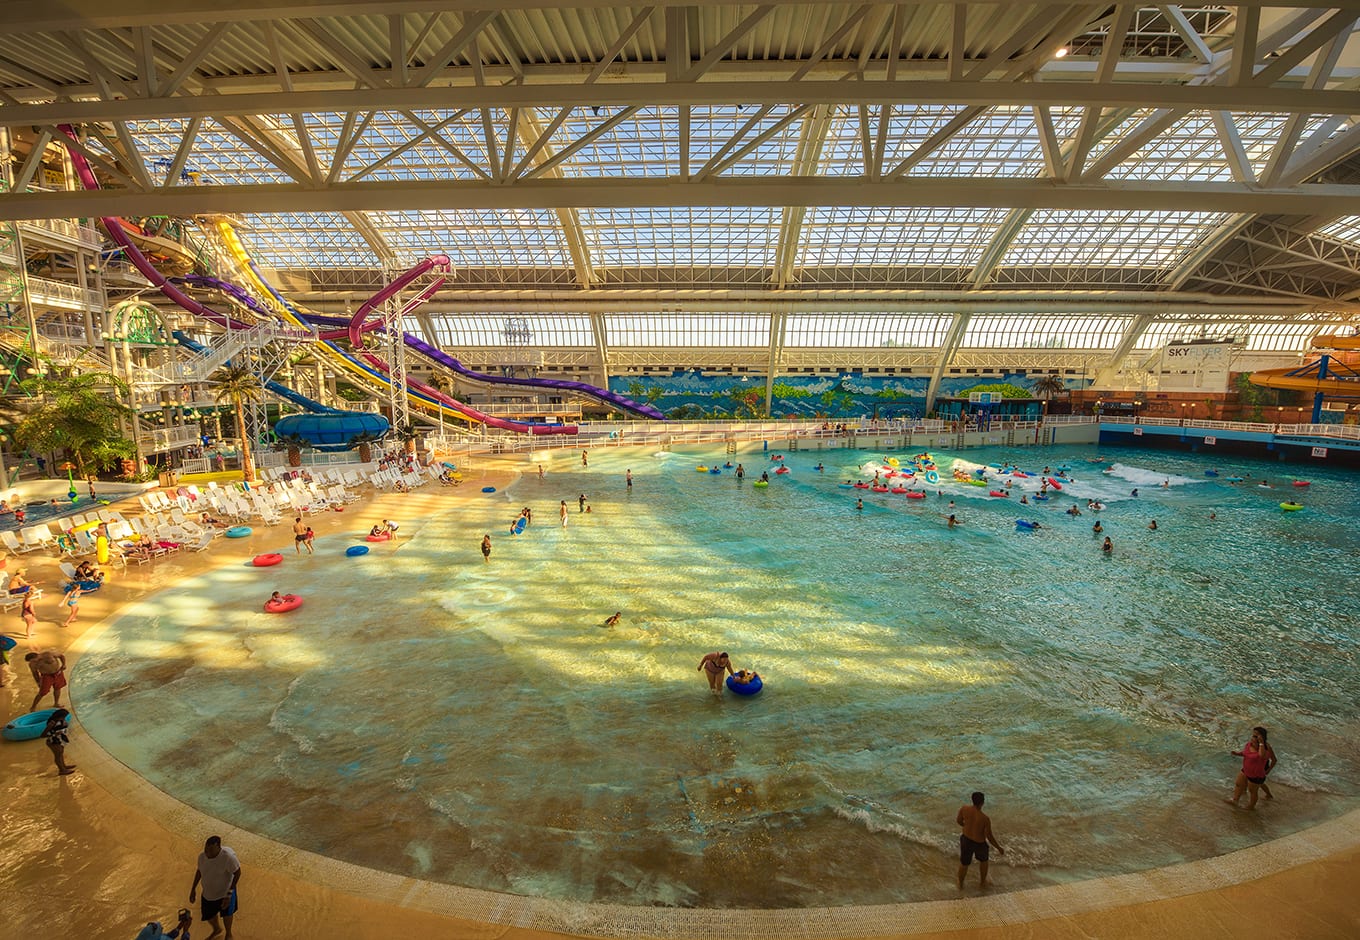 Colorful waterslides leading to a giant pool at the World Waterpark, in Canada.